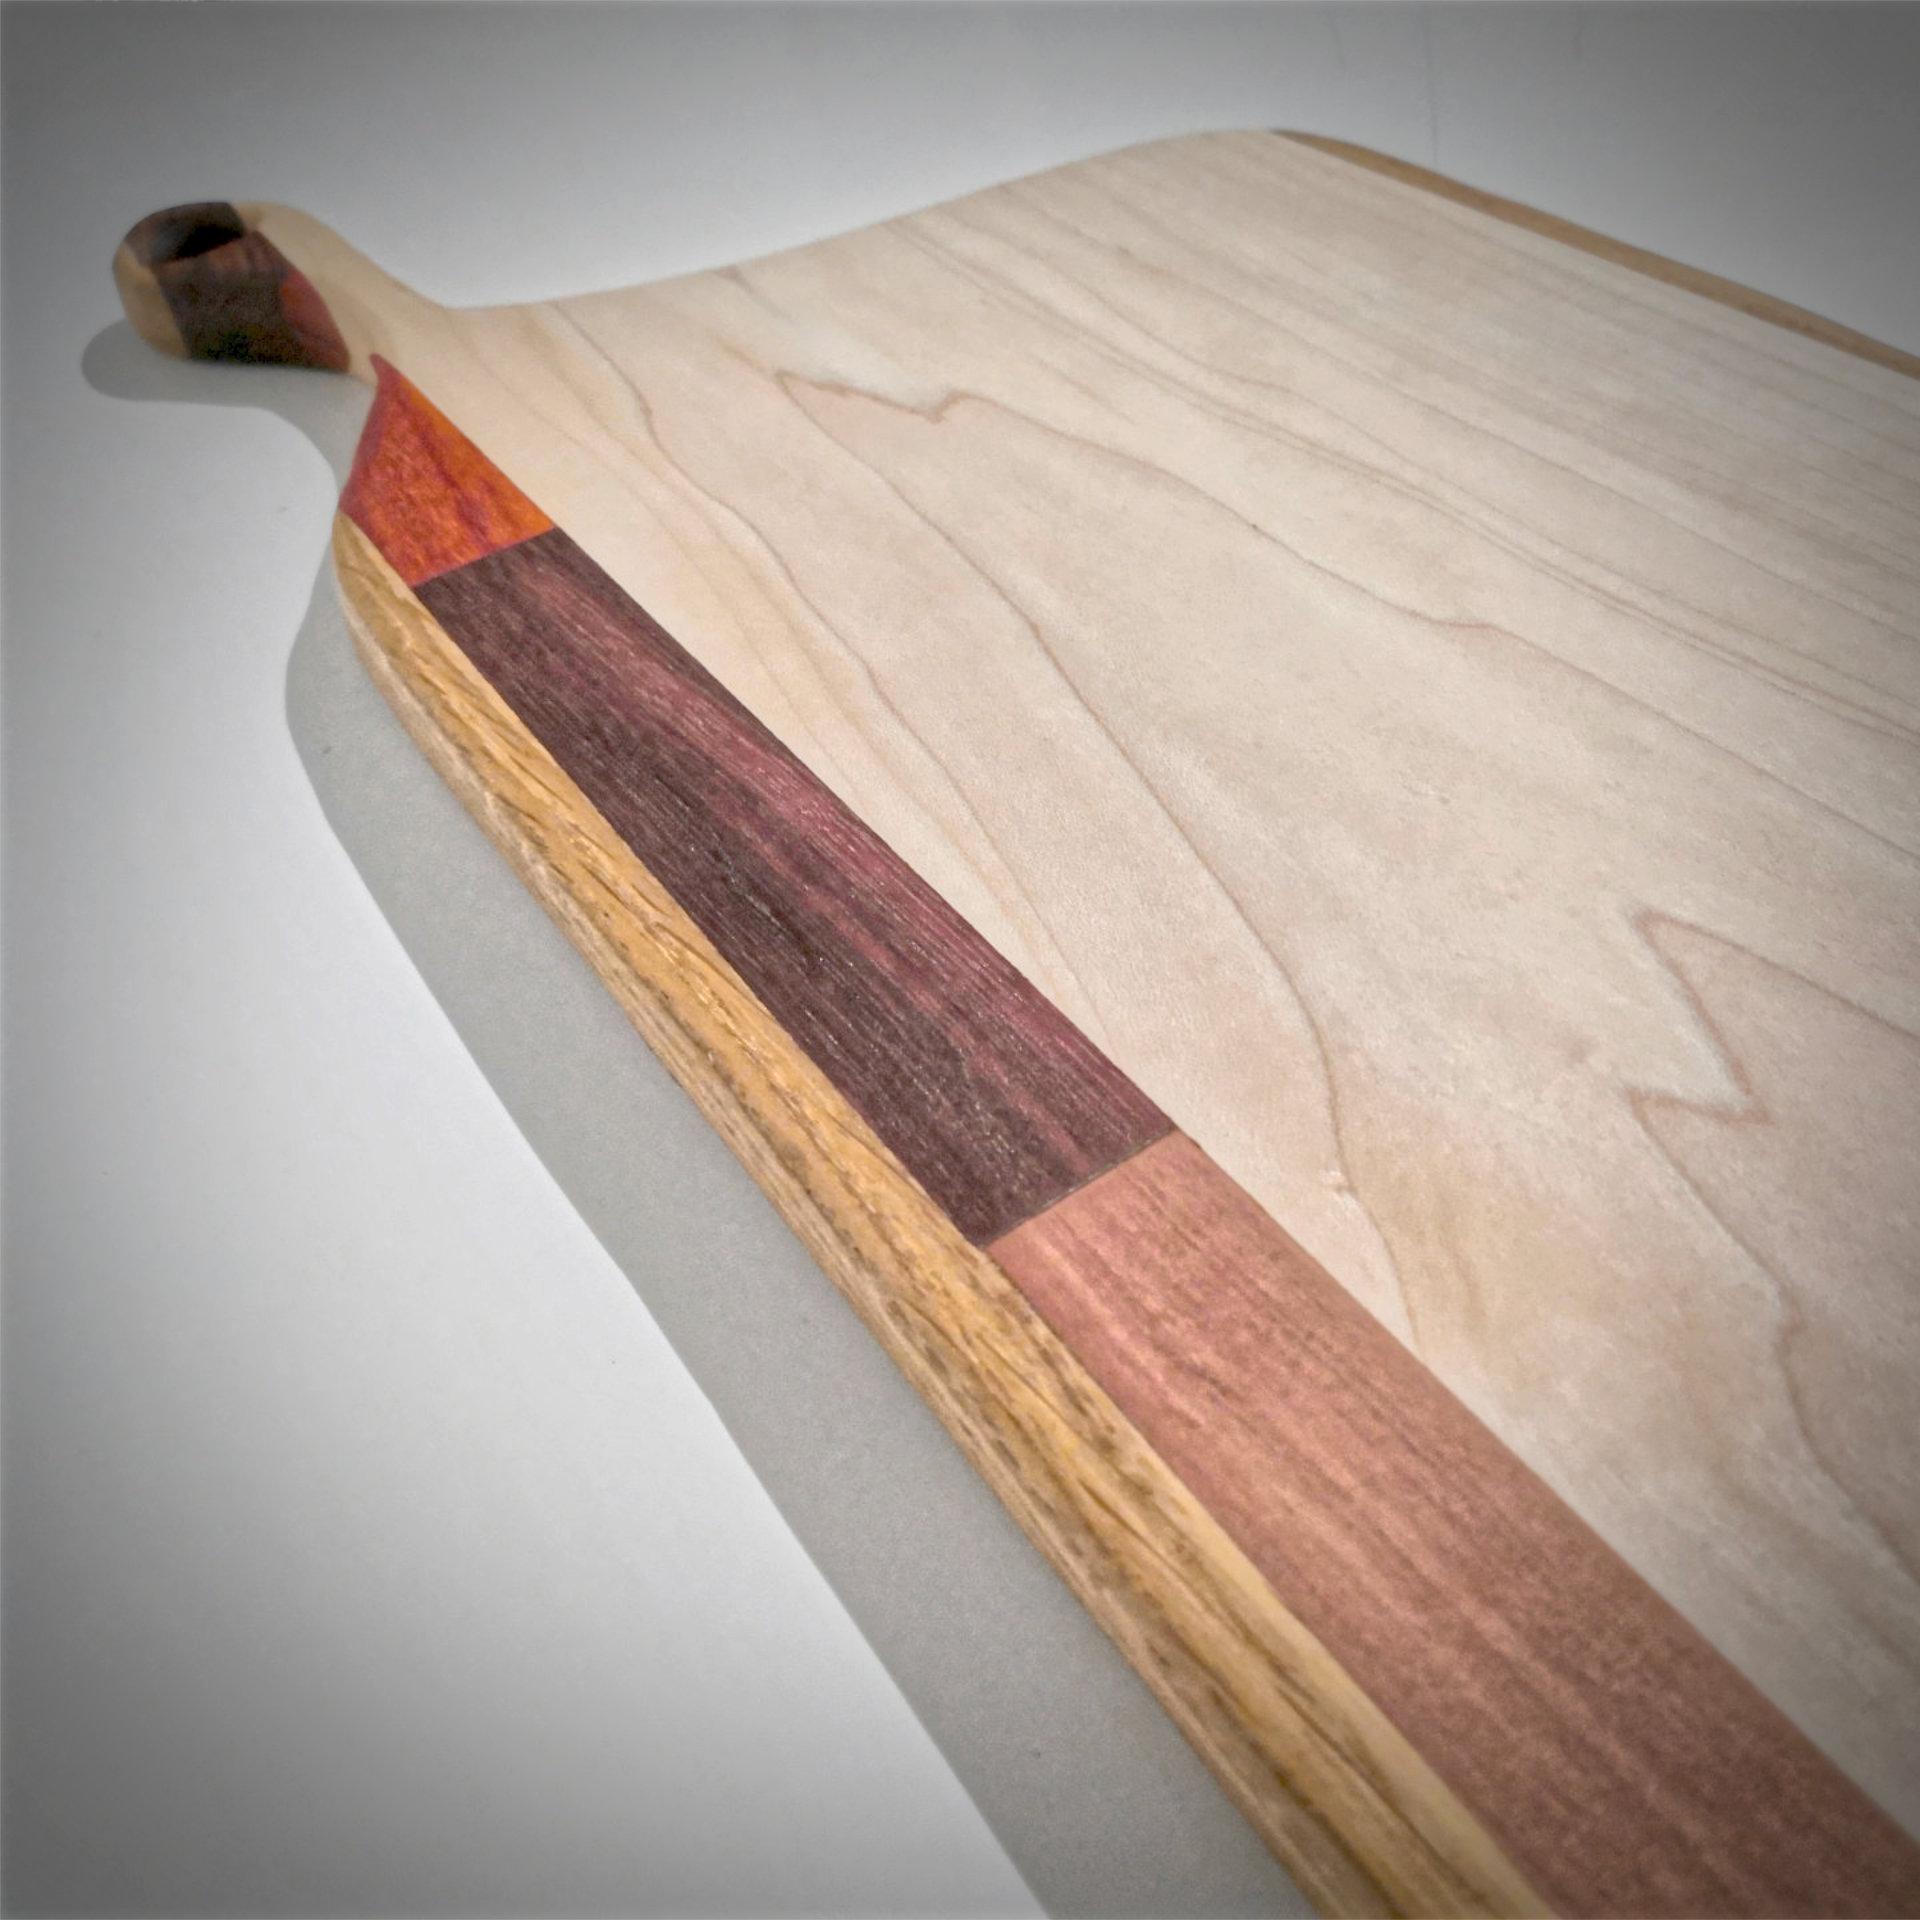 Different hardwoods combined in a serving board